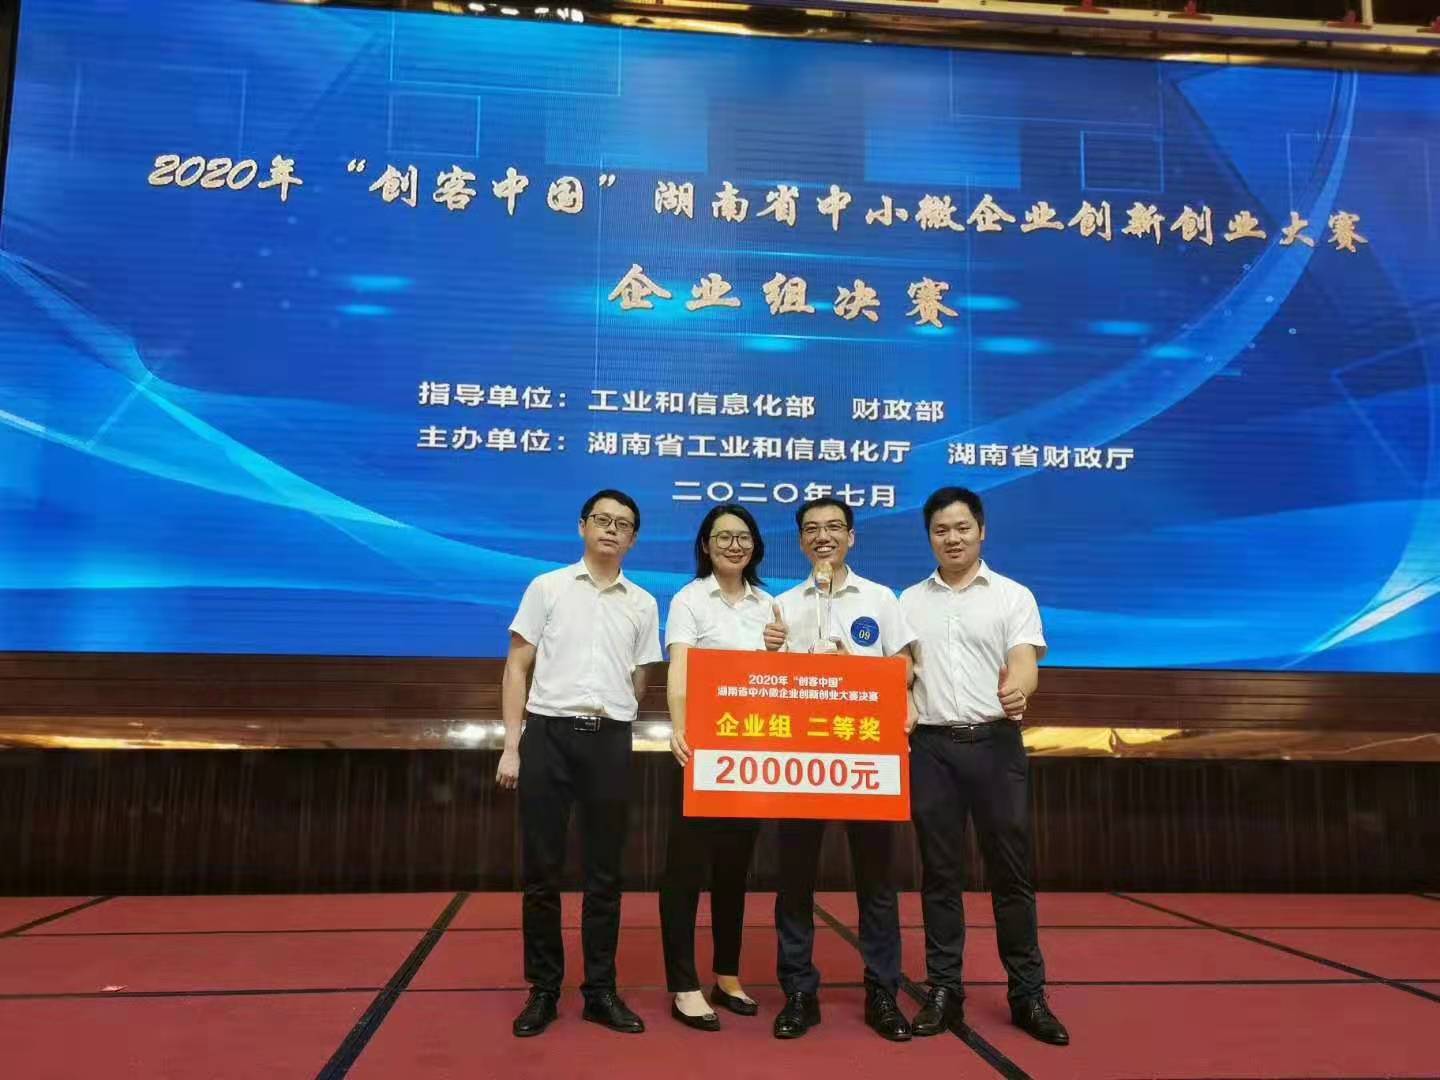 Dajing Medical Won the Second Prize of Hunan Creator Competition